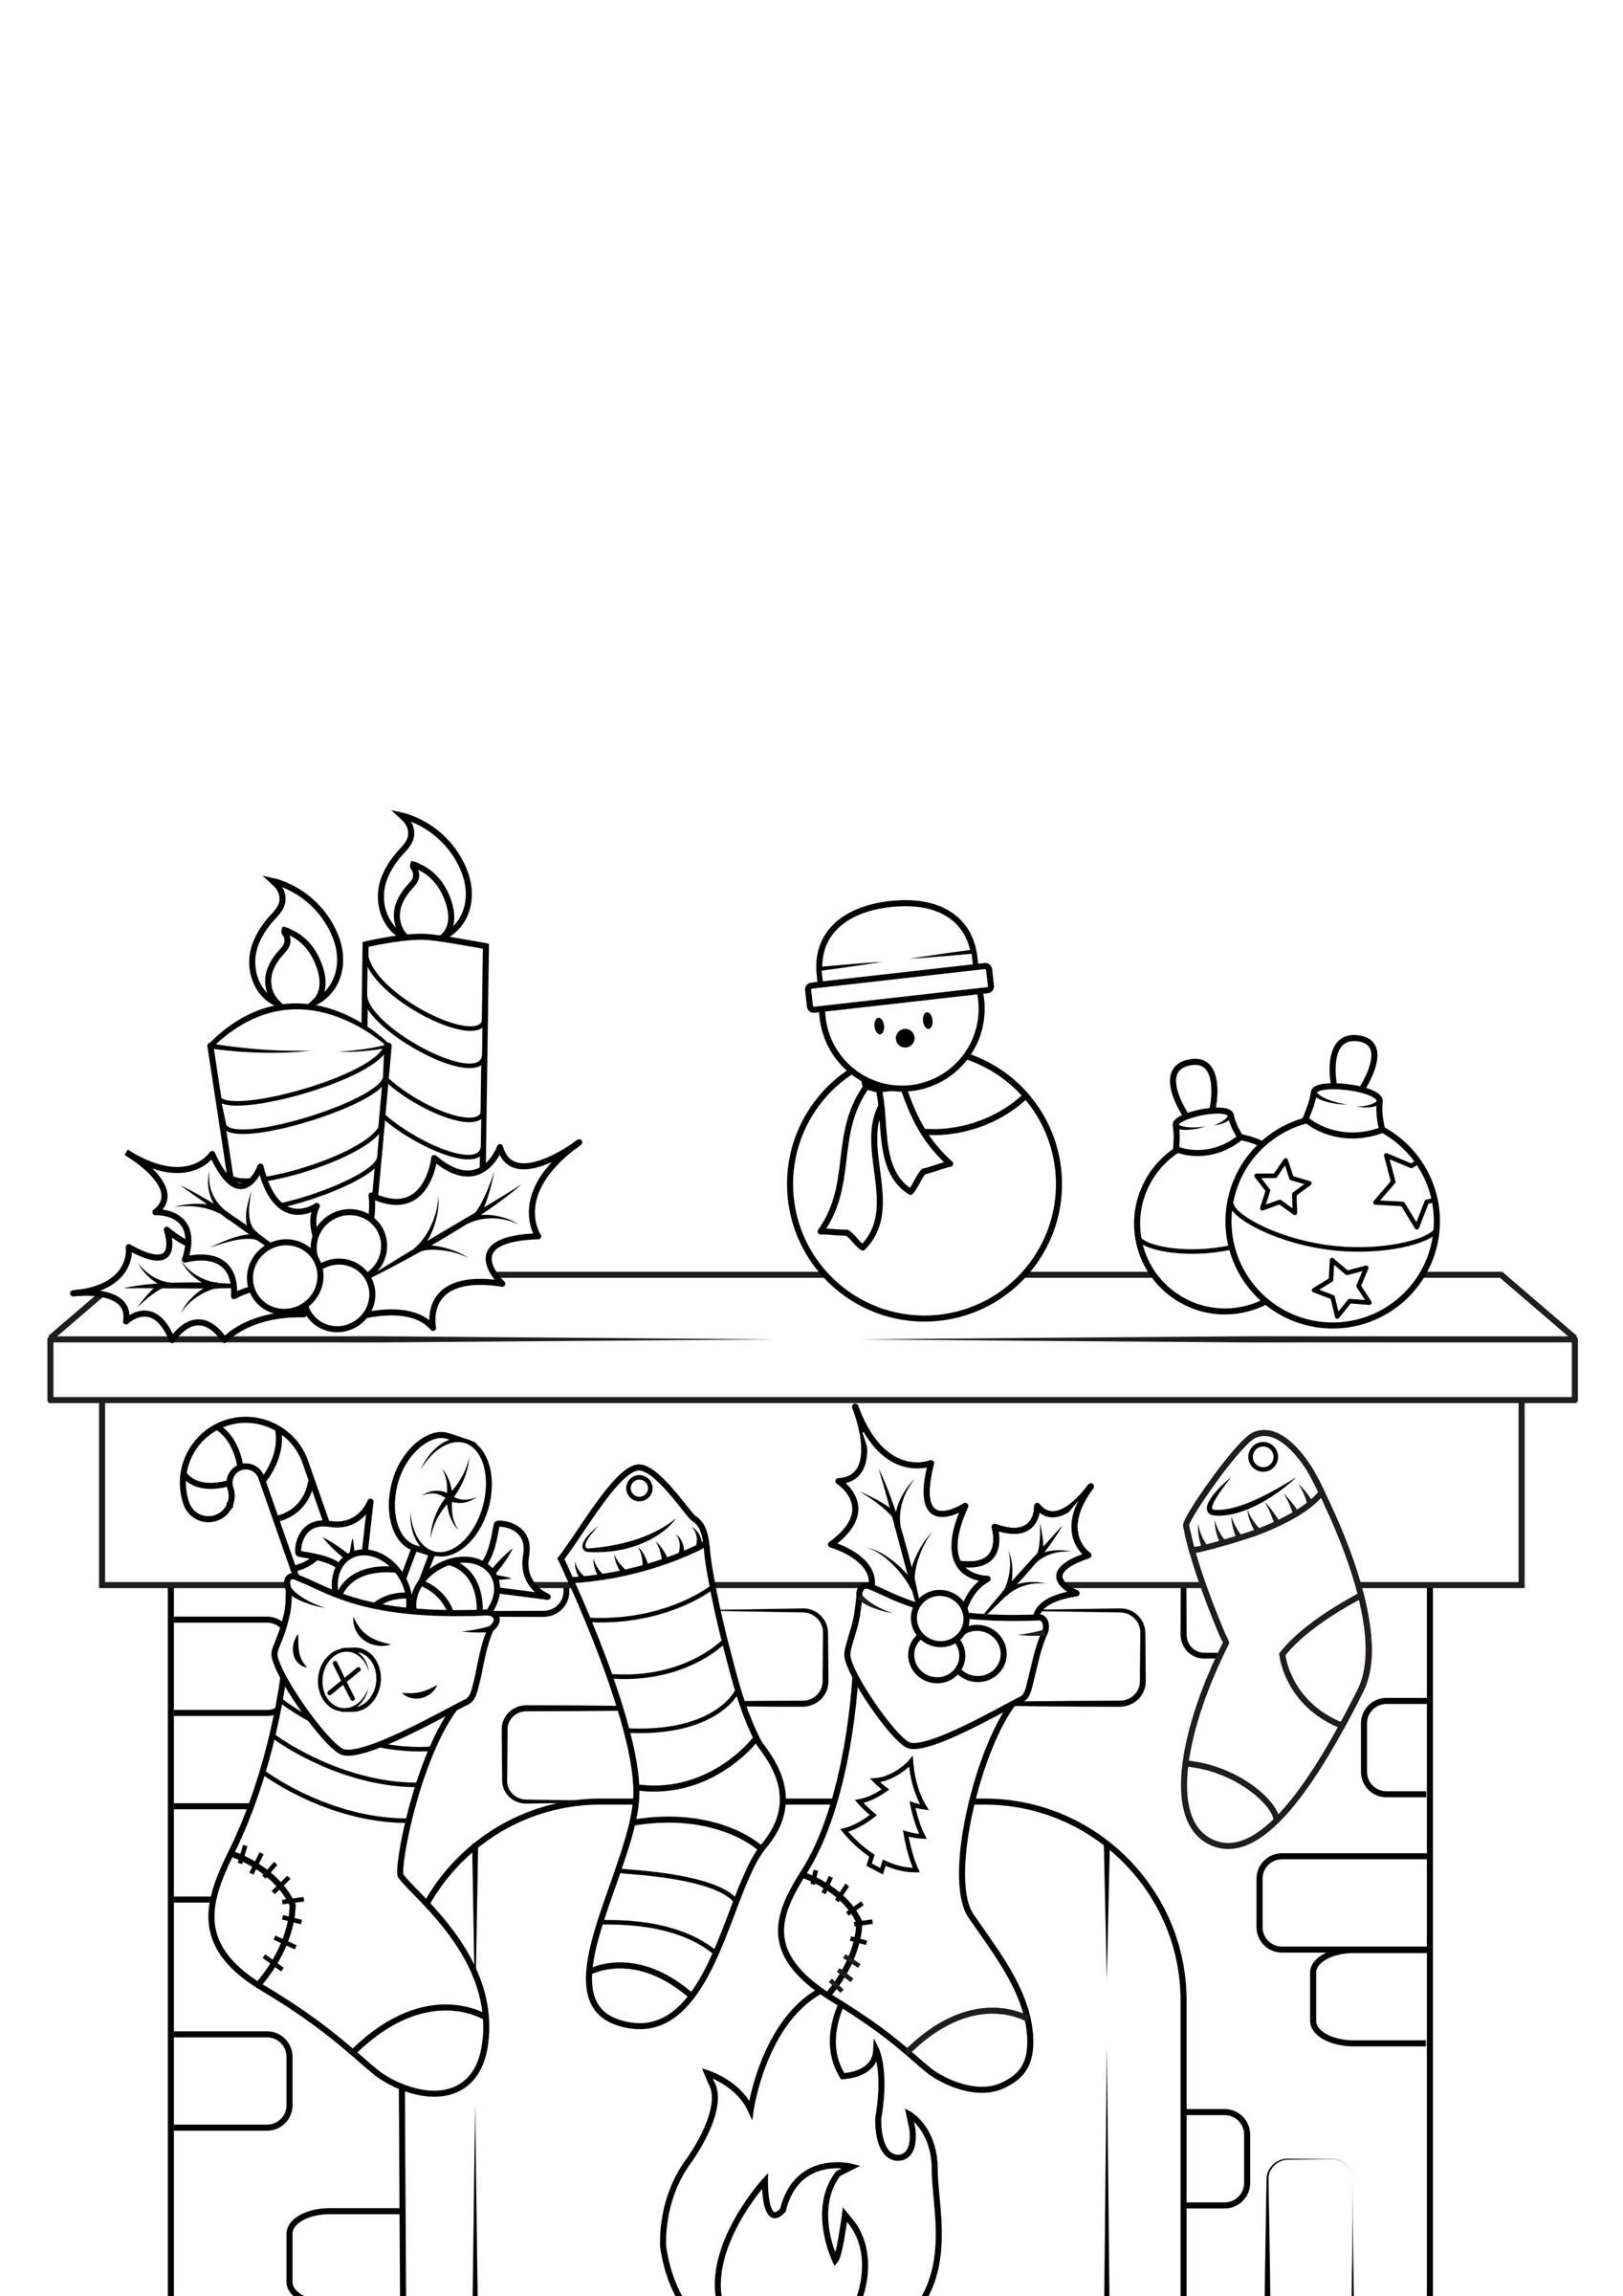 Coloring page Christmas decorations with Christmas stocking